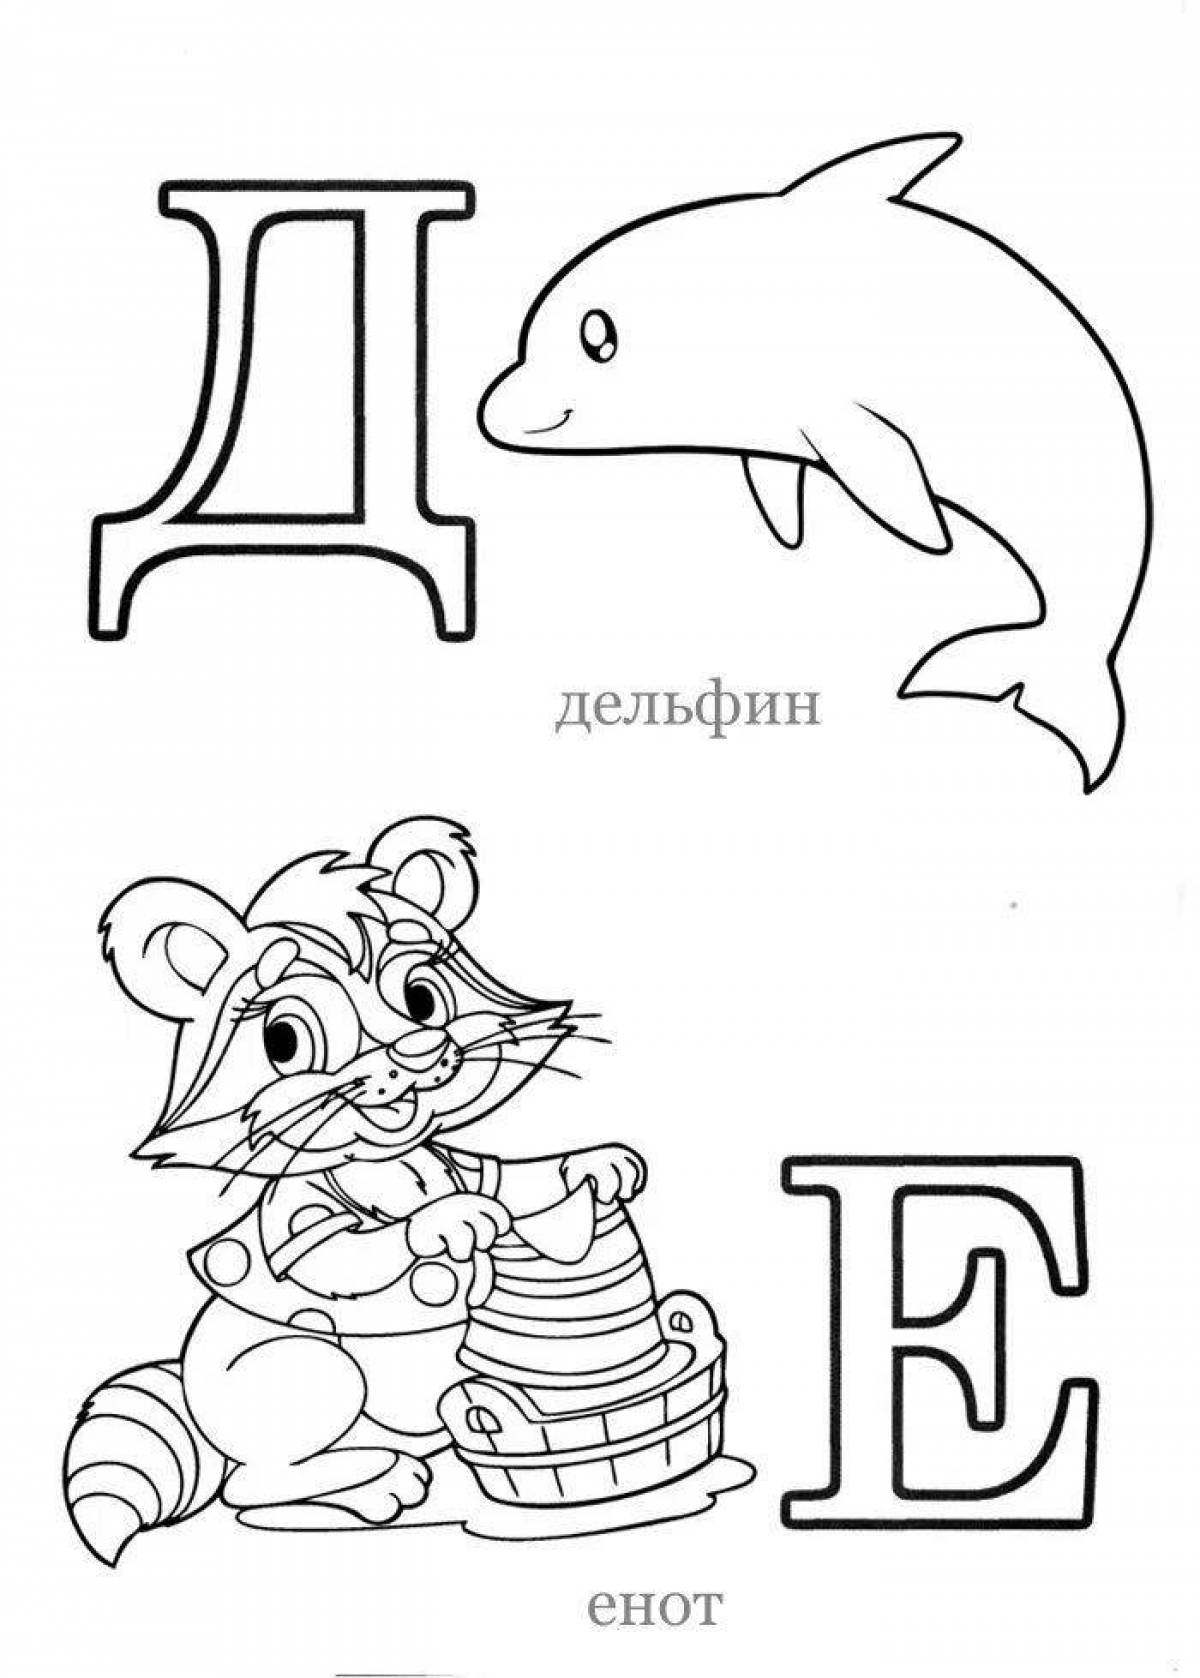 Attractive letter d coloring book for kids